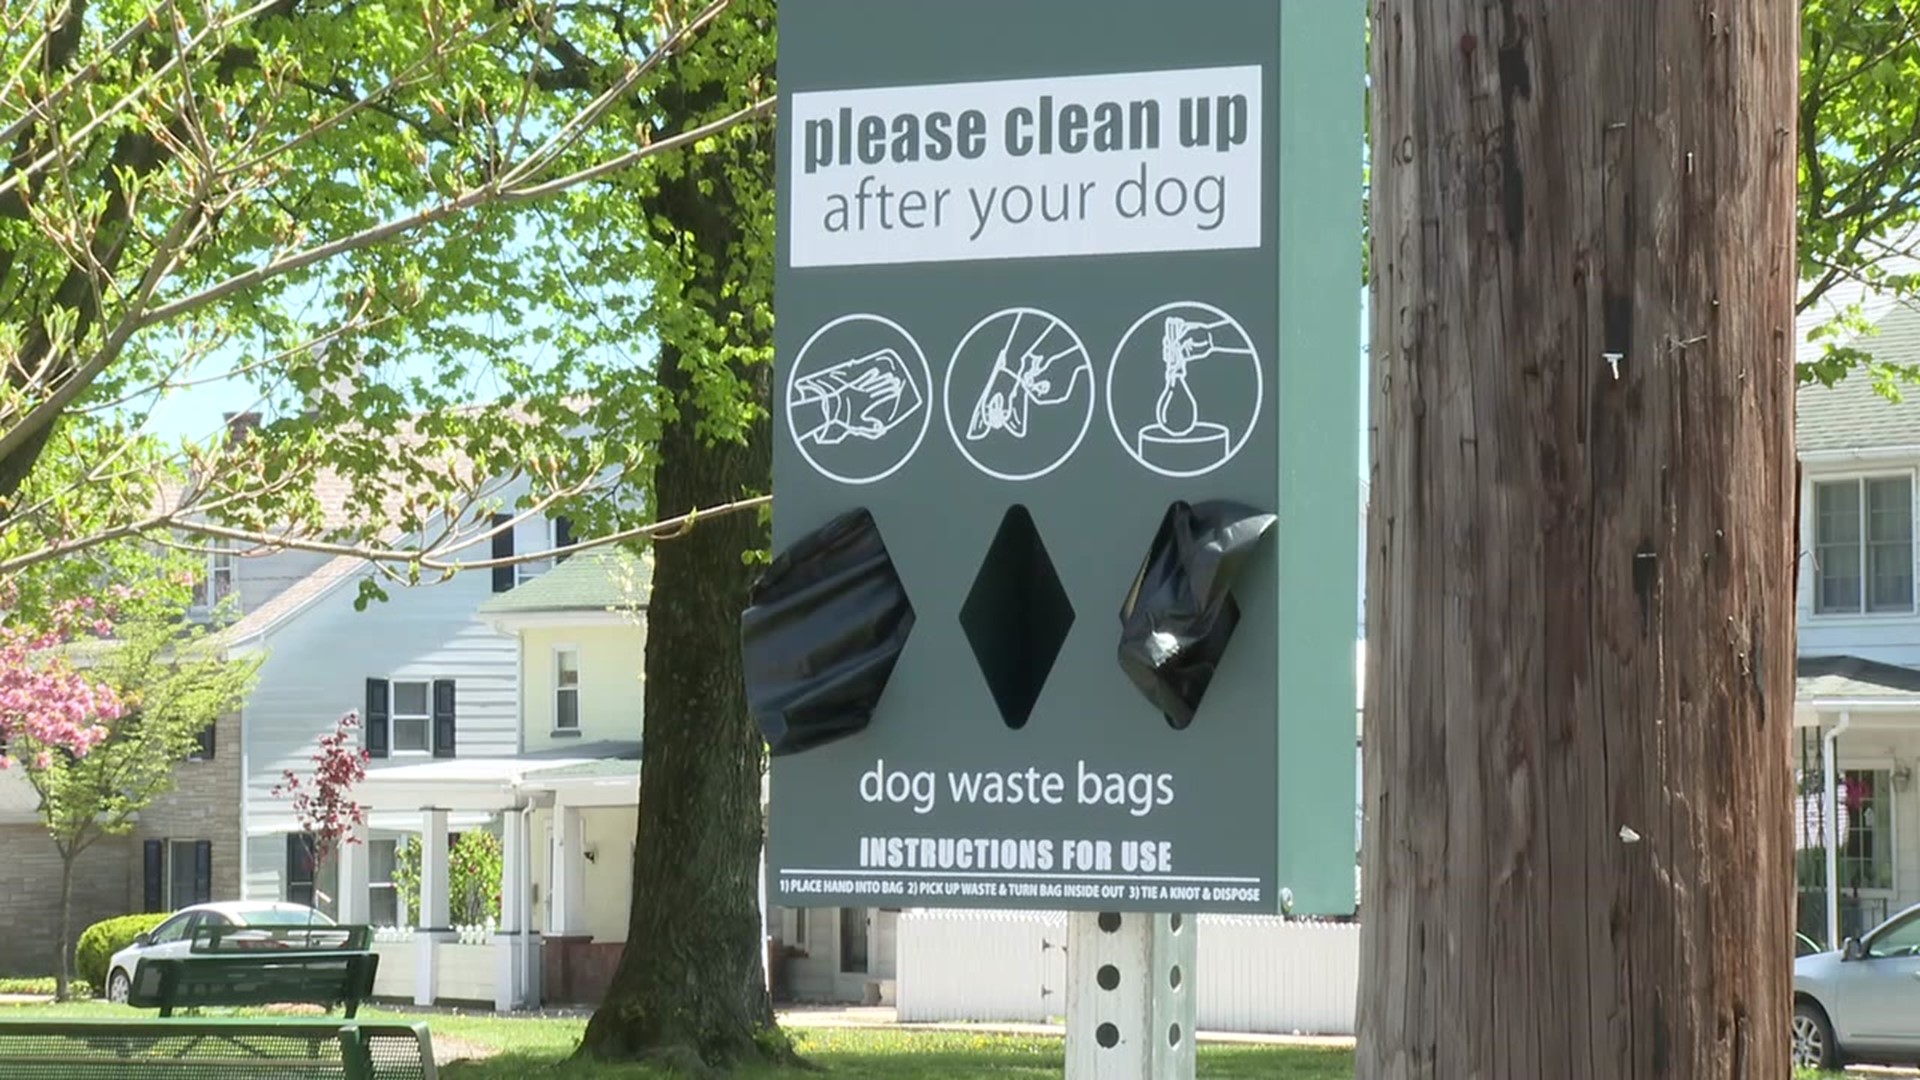 The borough installed new dog waste stations in five parks and near the entrance of Summit Hill Cemetery in an effort to get residents to clean up after their pets.